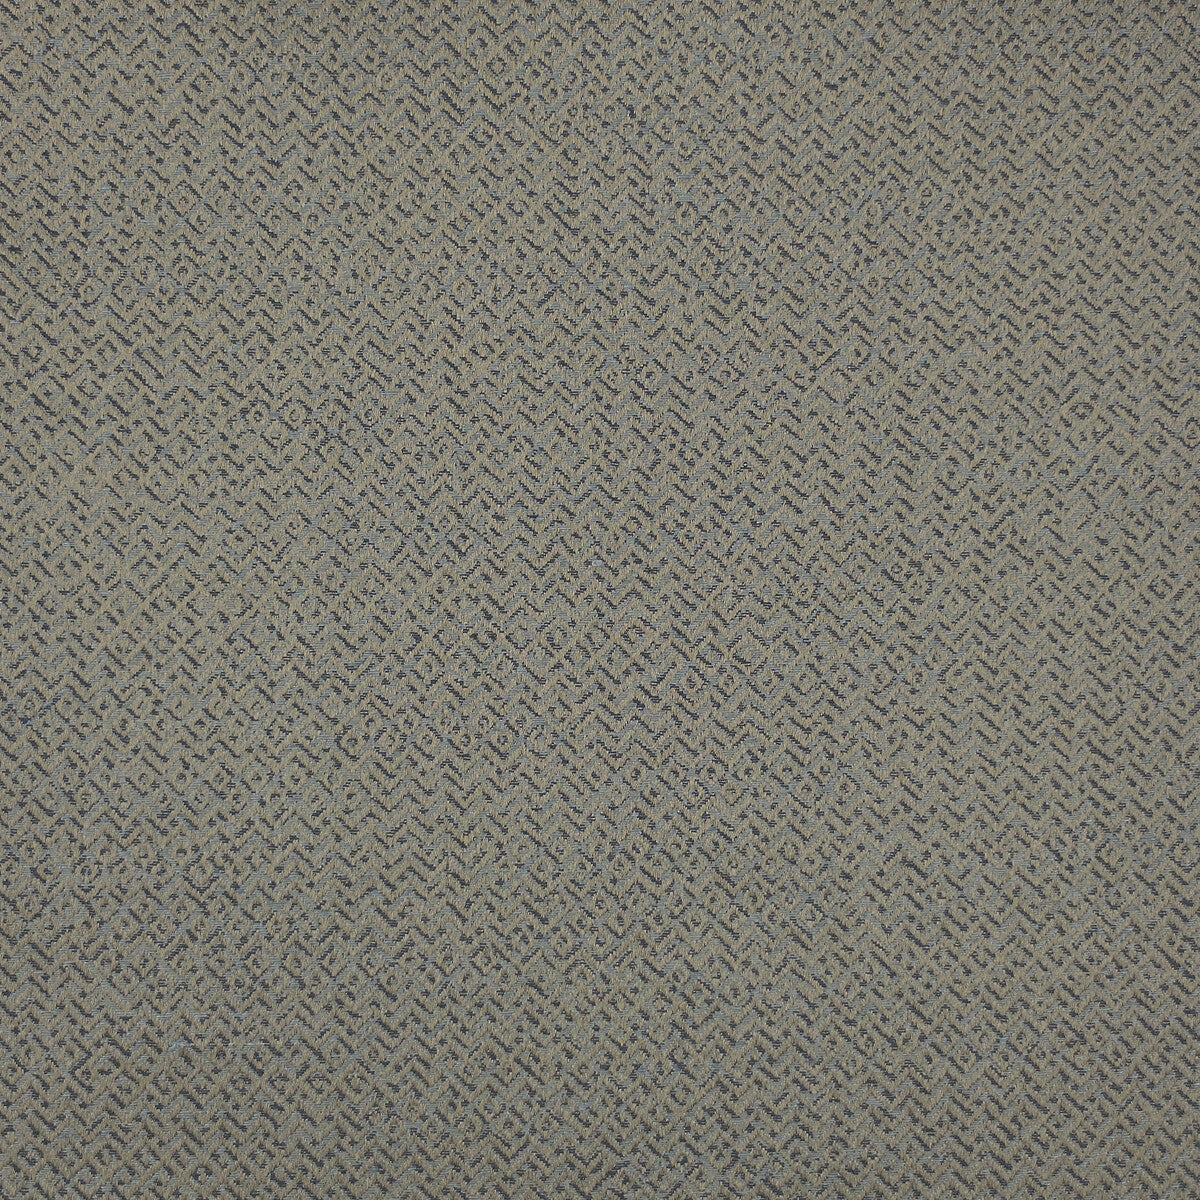 Kf Des fabric - pattern LZ-30203.03.0 - by Kravet Design in the Lizzo collection